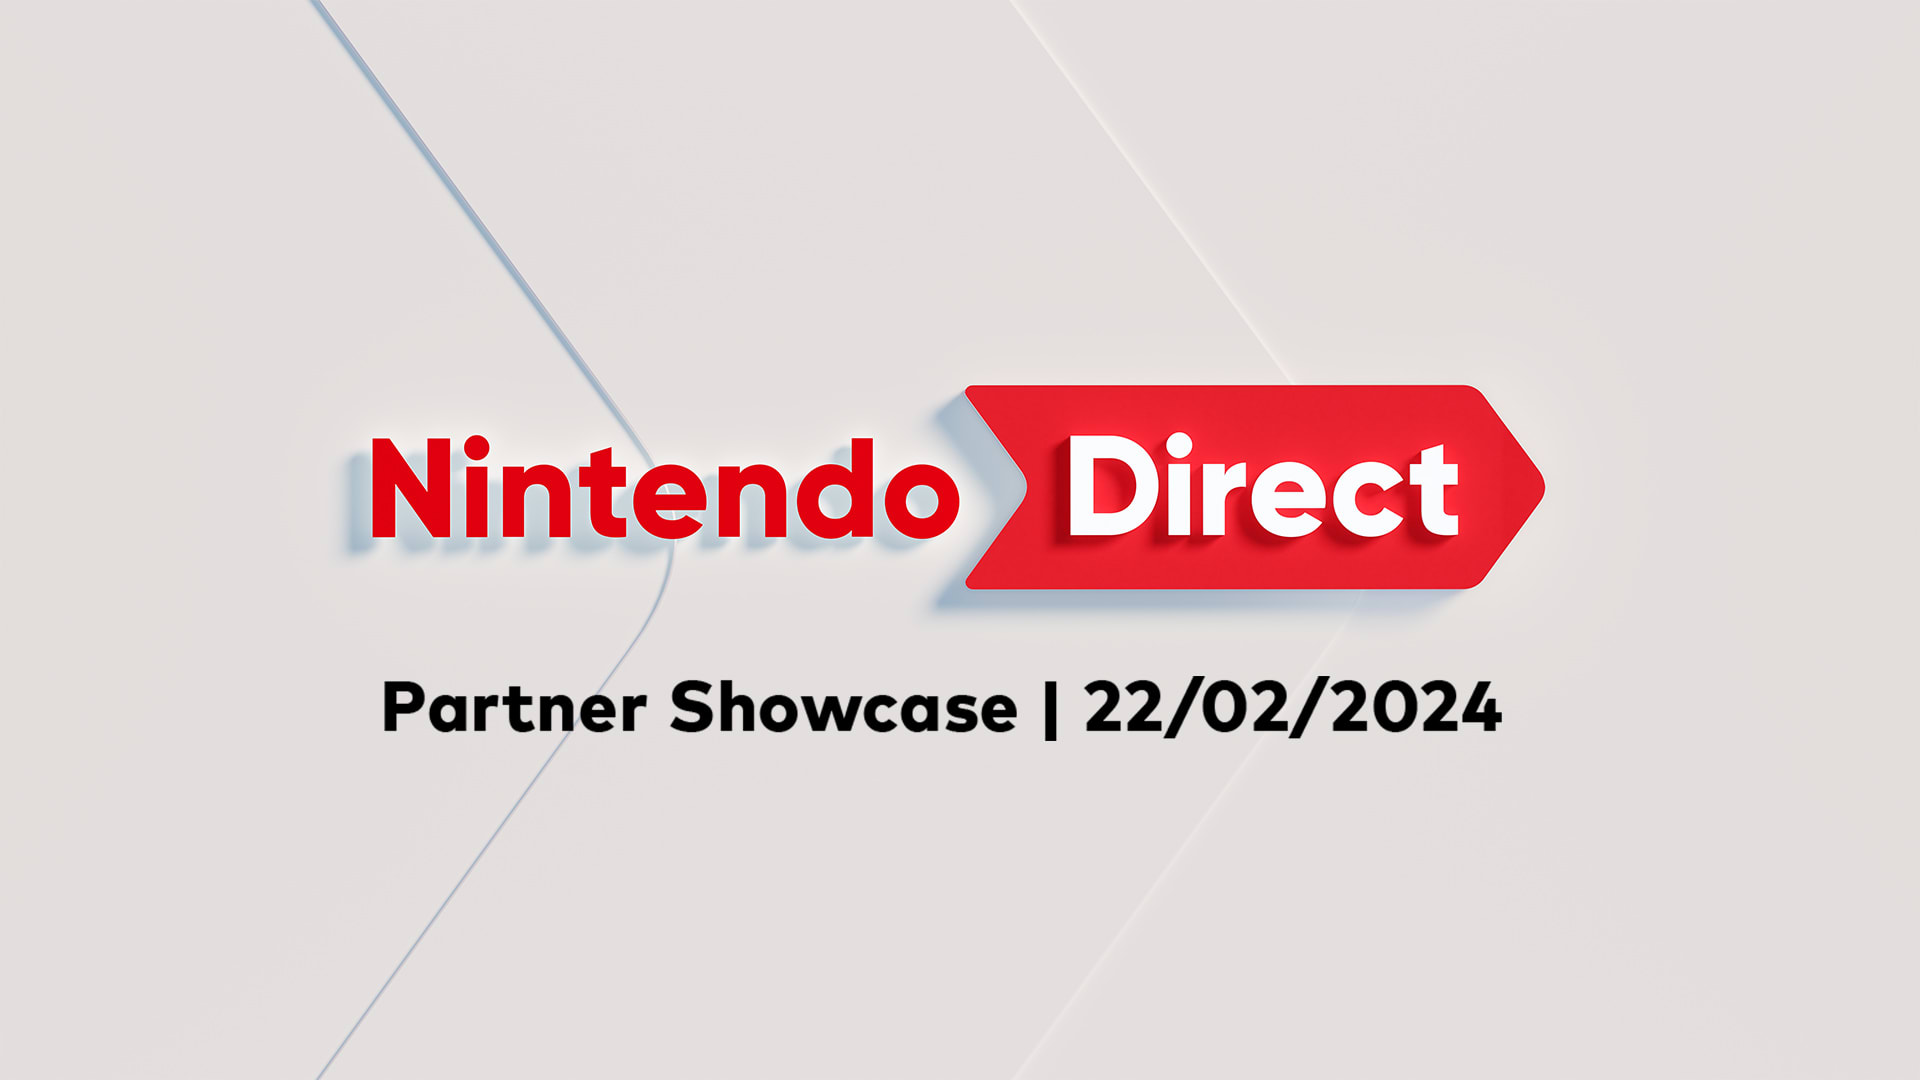 Nintendo Direct: Partner Showcase features surprise releases and details on new Nintendo Switch games Hero